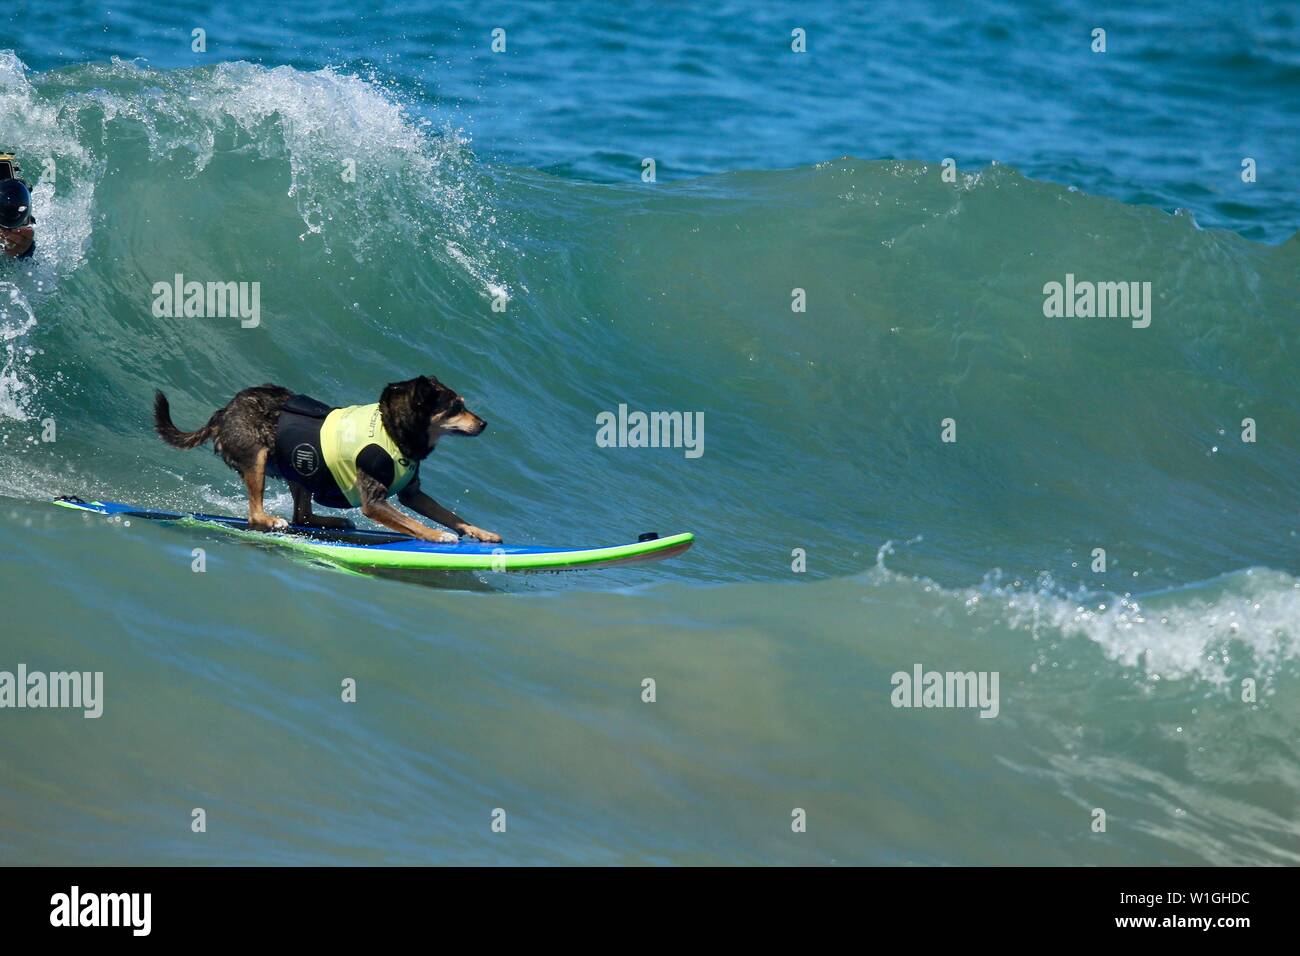 Abbie the Australian kelpie surfing dog catching a wave at a dog surfing event in Huntington Beach California Stock Photo